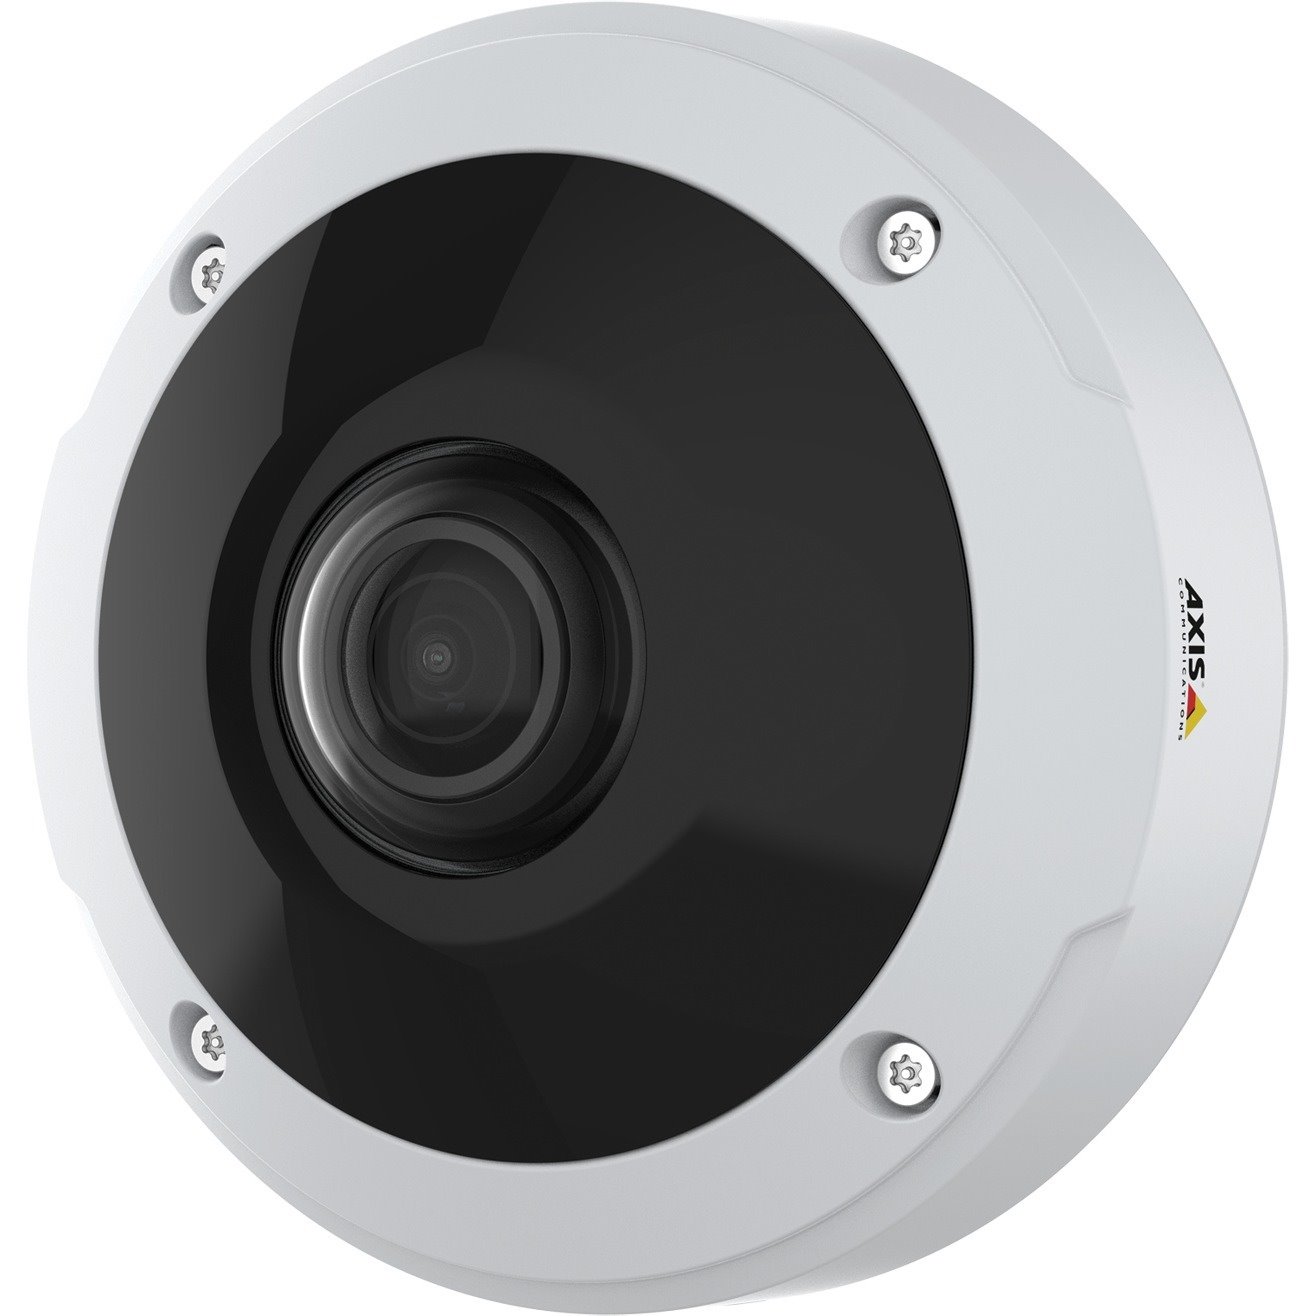 AXIS M3057-PLVE MkII 6 Megapixel Indoor/Outdoor Network Camera - Color - Dome - White